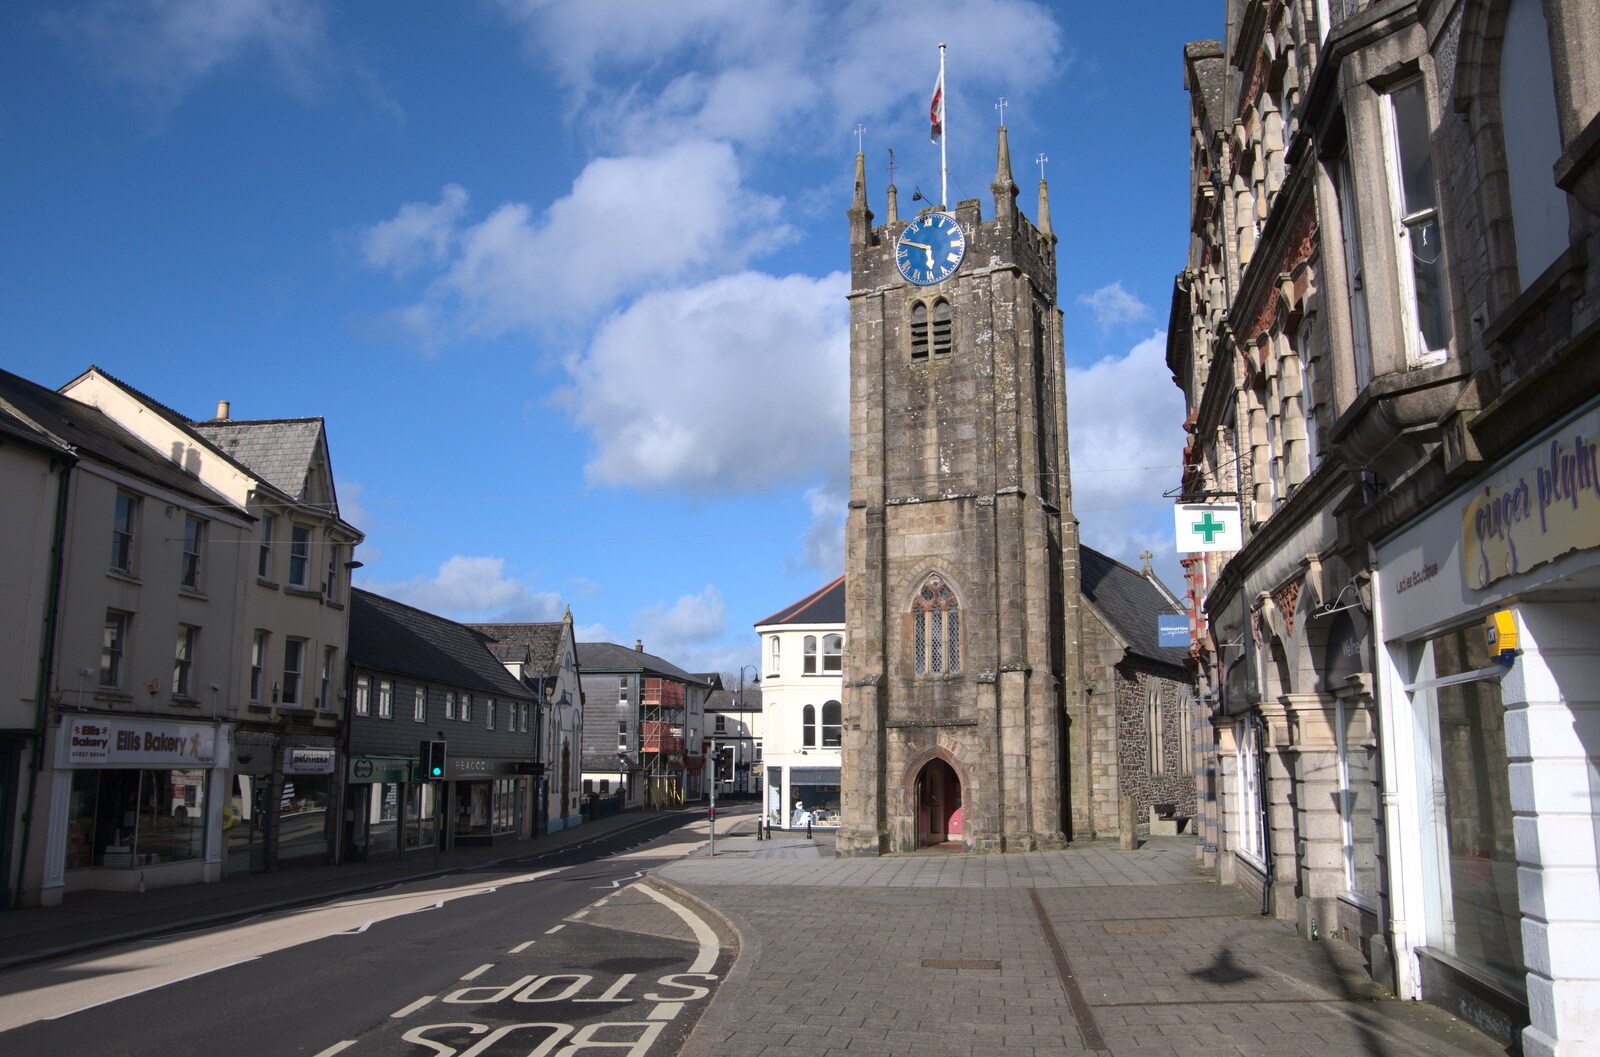 St. Michael's on Fore Street from Chilli Farms, Okehampton and the Oxenham Arms, South Zeal, Devon - 10th April 2023